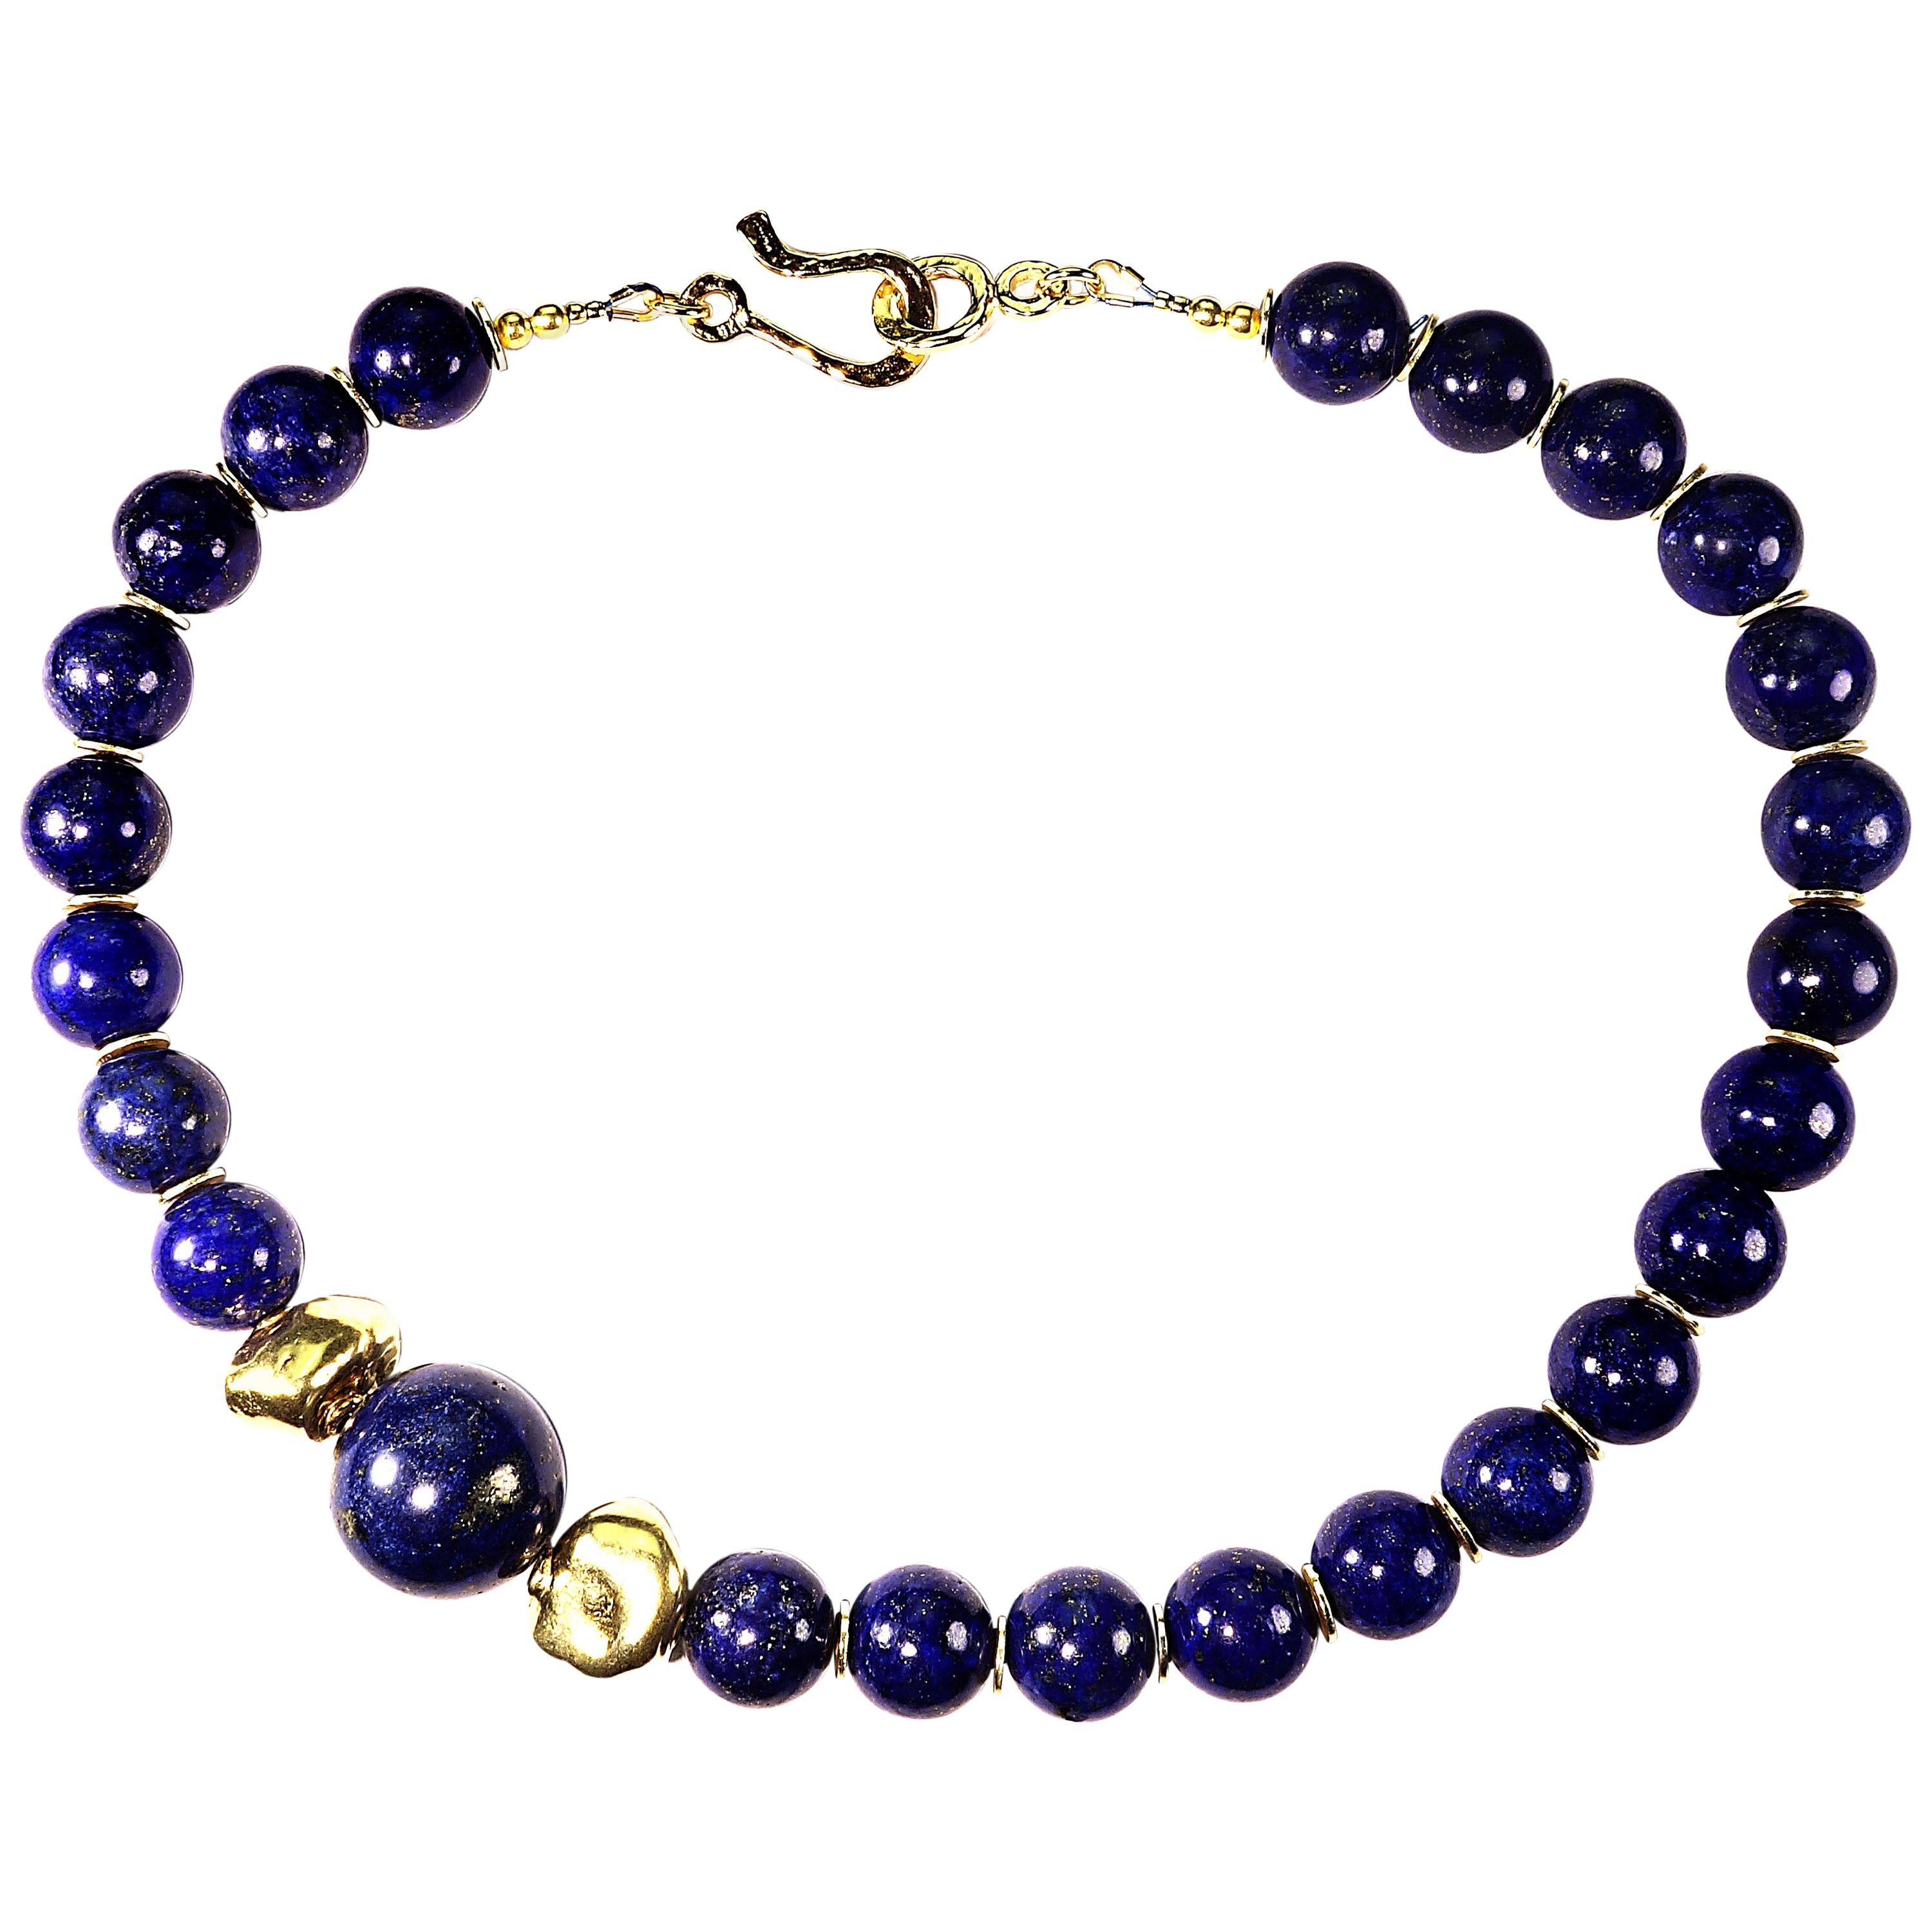 16 Inch elegant, handmade choker necklace of highly polished Lapis Lazuli with an off center focal of two golden toned nuggets and one 18MM Lapis Lazuli sphere. This 16 inch choker is secured with a 14K gold vermeil hammered hook and eye clasp. Wear